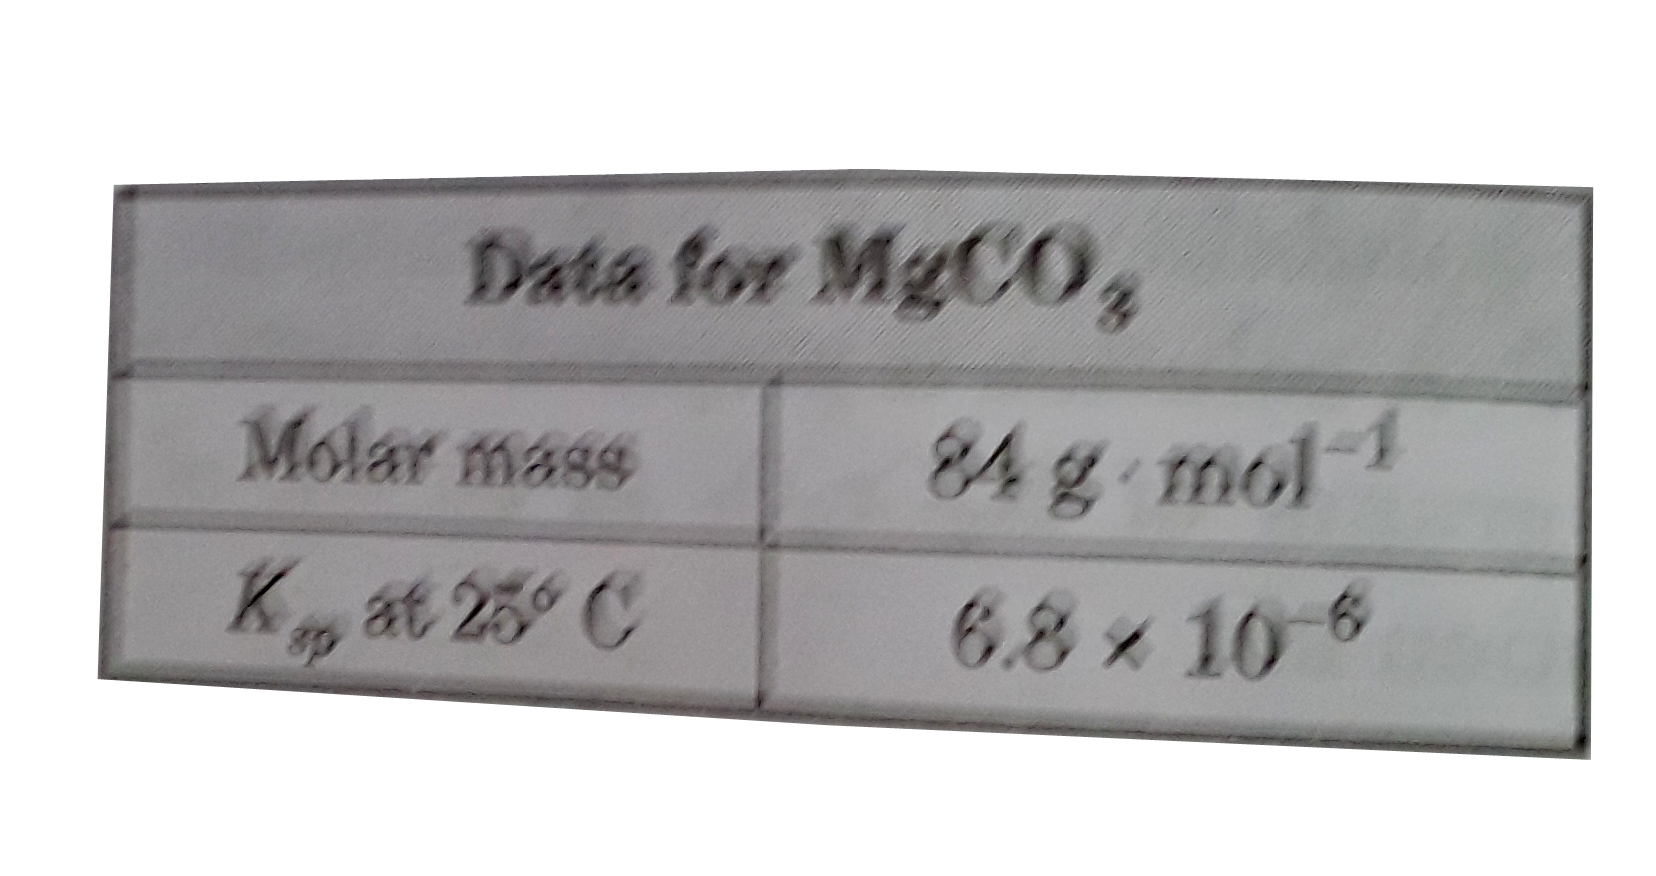 What is the solubility of magnesion carbonate, MgCO(3), in water at 25^(@)C?